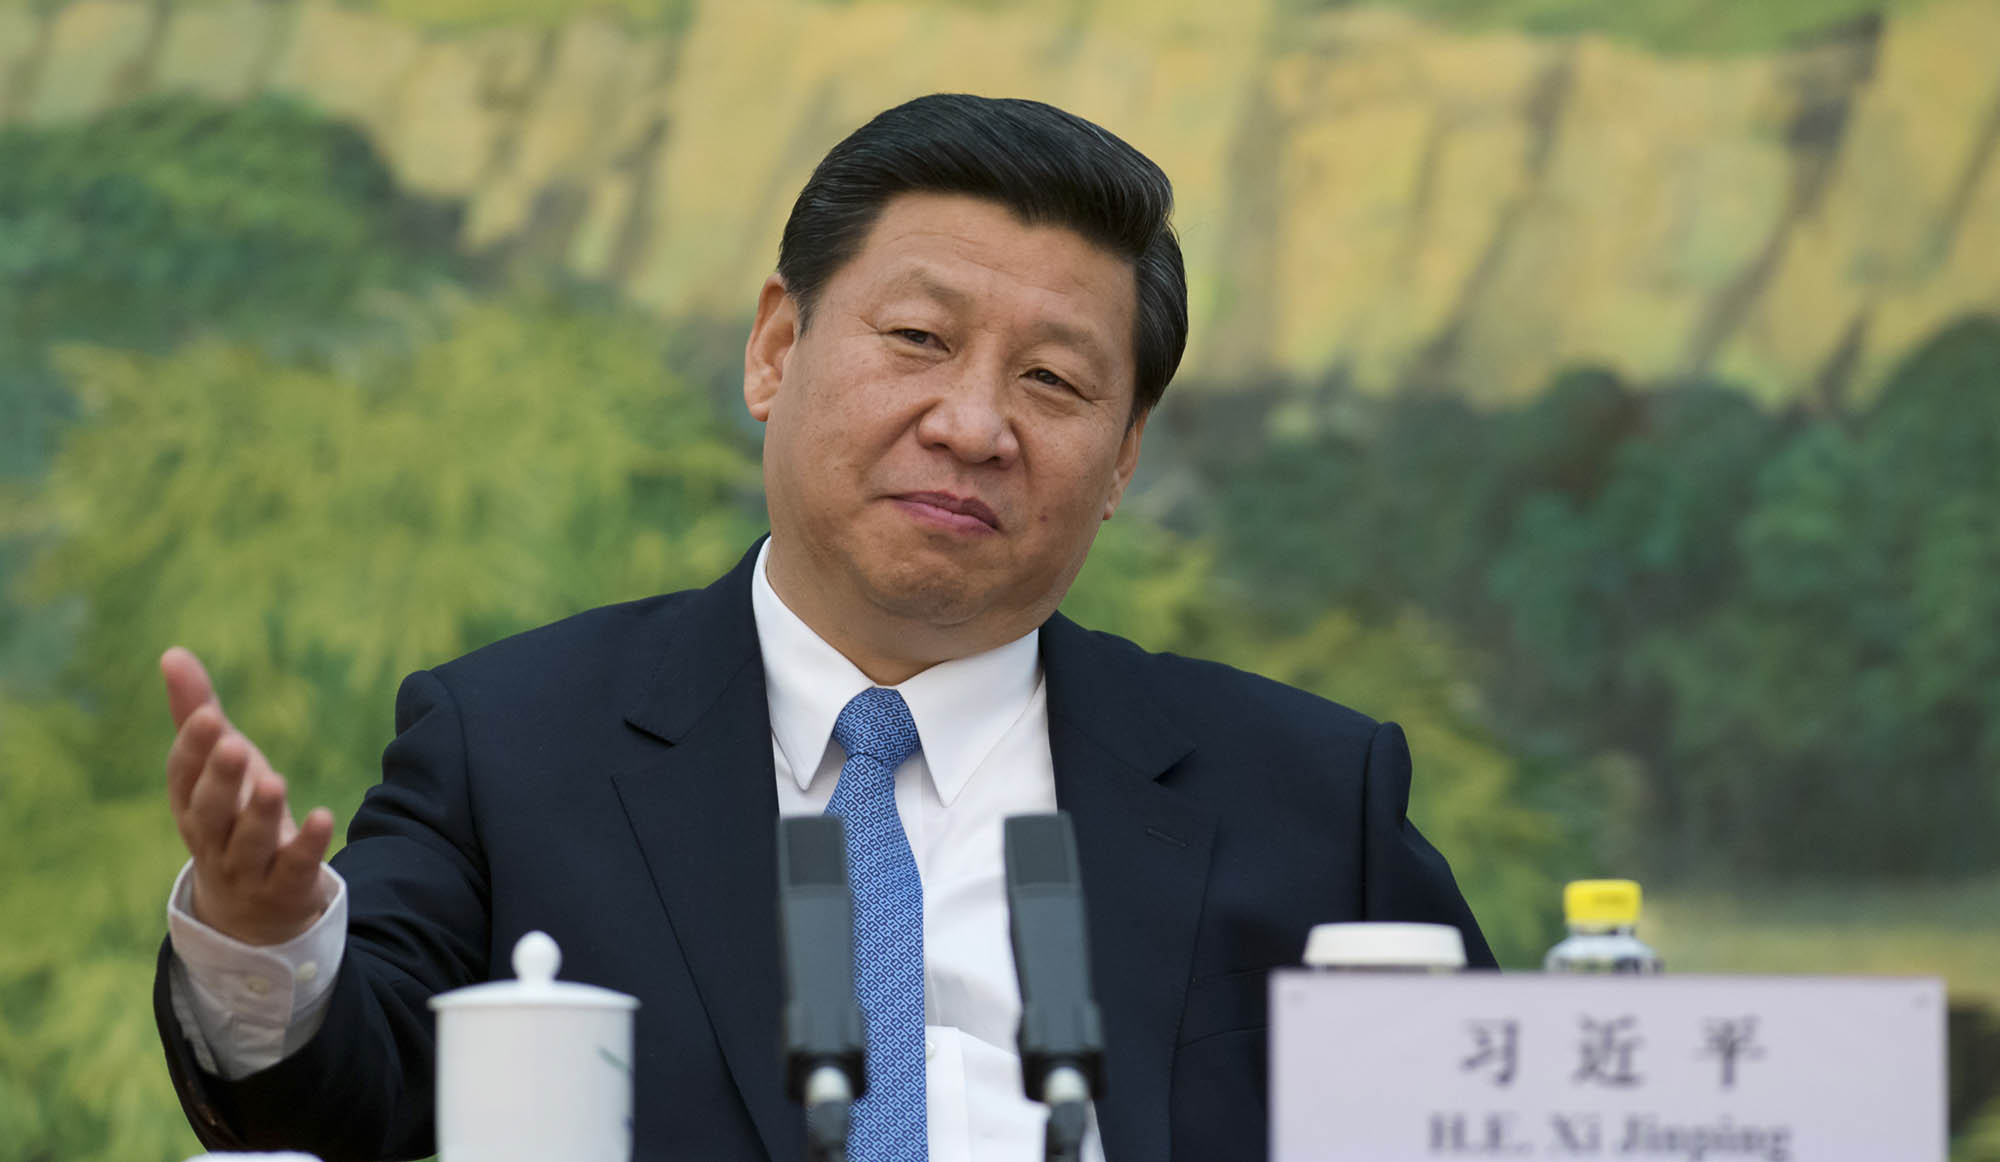 China's newly appointed leader Xi Jinping gestures during a meeting with a panel of foreign experts at the Great Hall of the People in Beijing